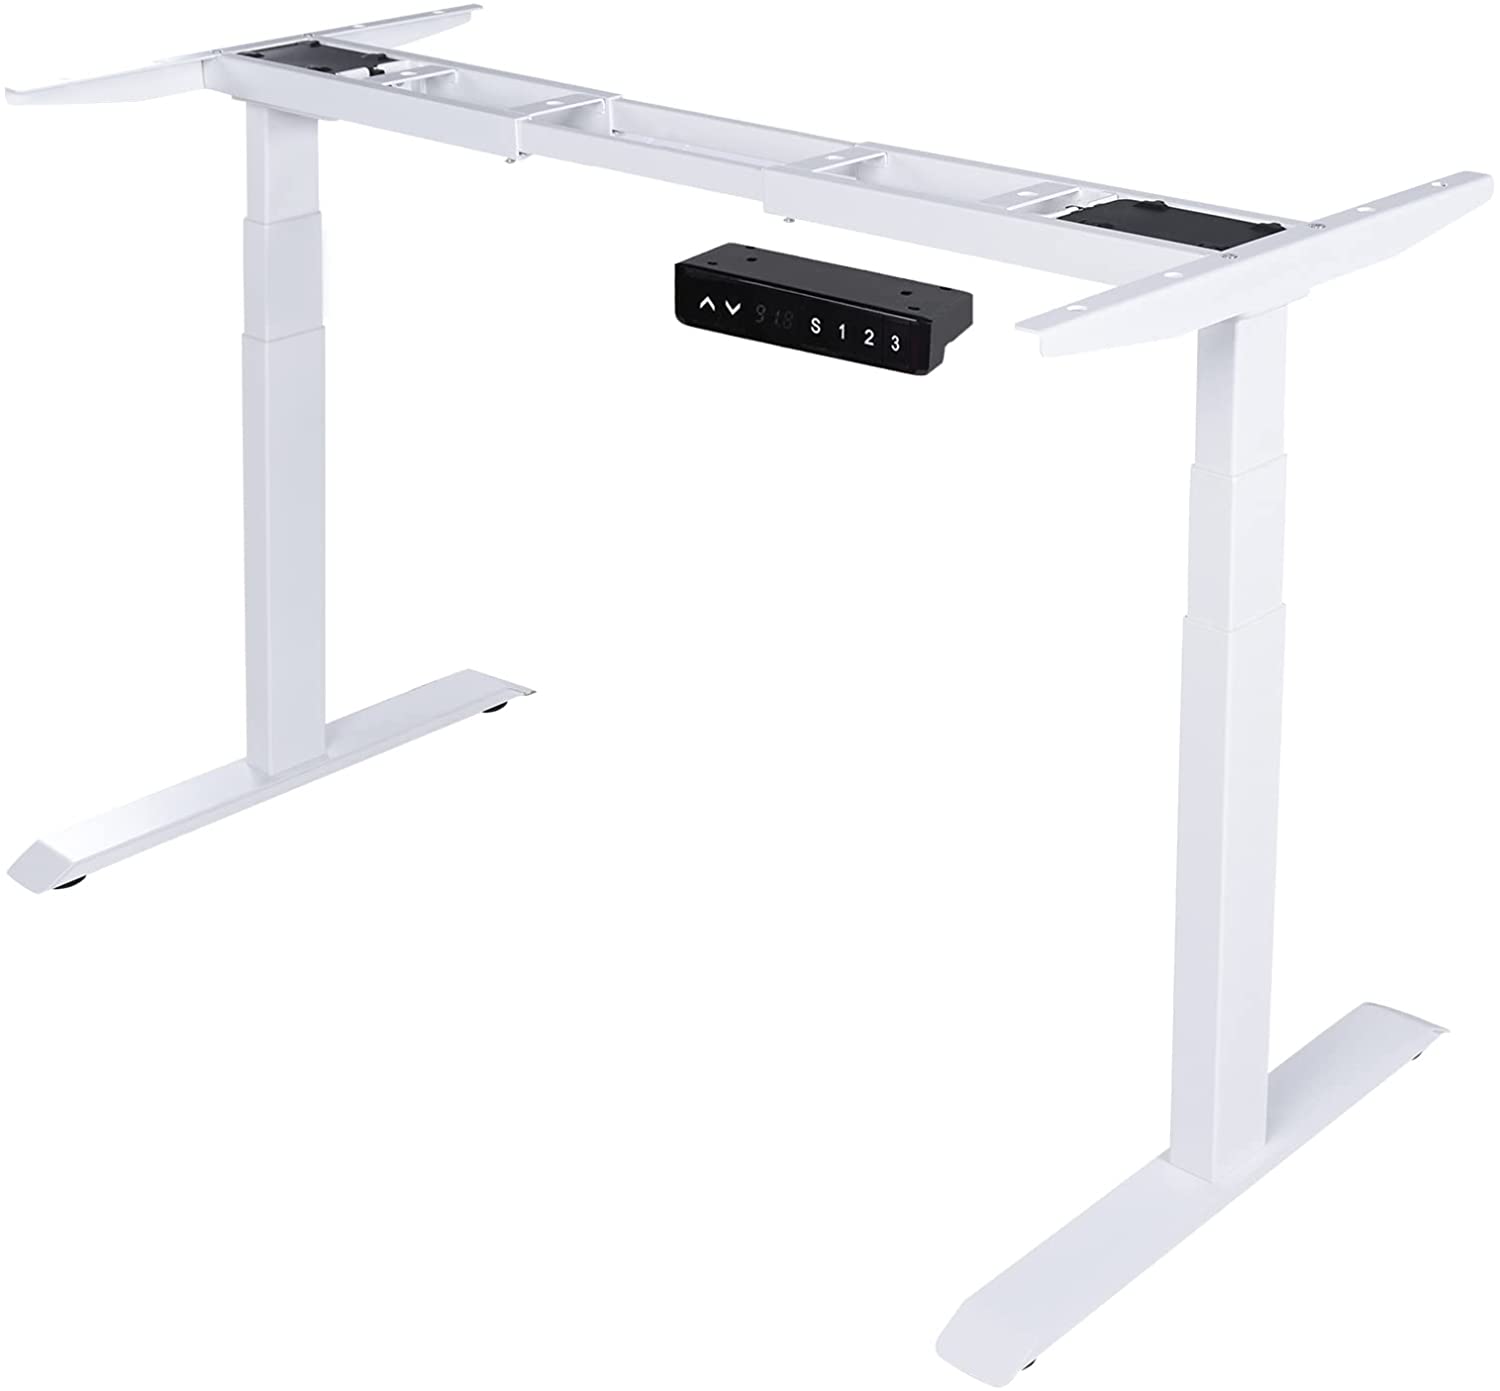 Fromann Electric 3 Tier Legs Dual Motor Desk Base Handset with USB A and C Ports - Sit Stand up Standing Height Adjustable Desk Frame for Home and Office